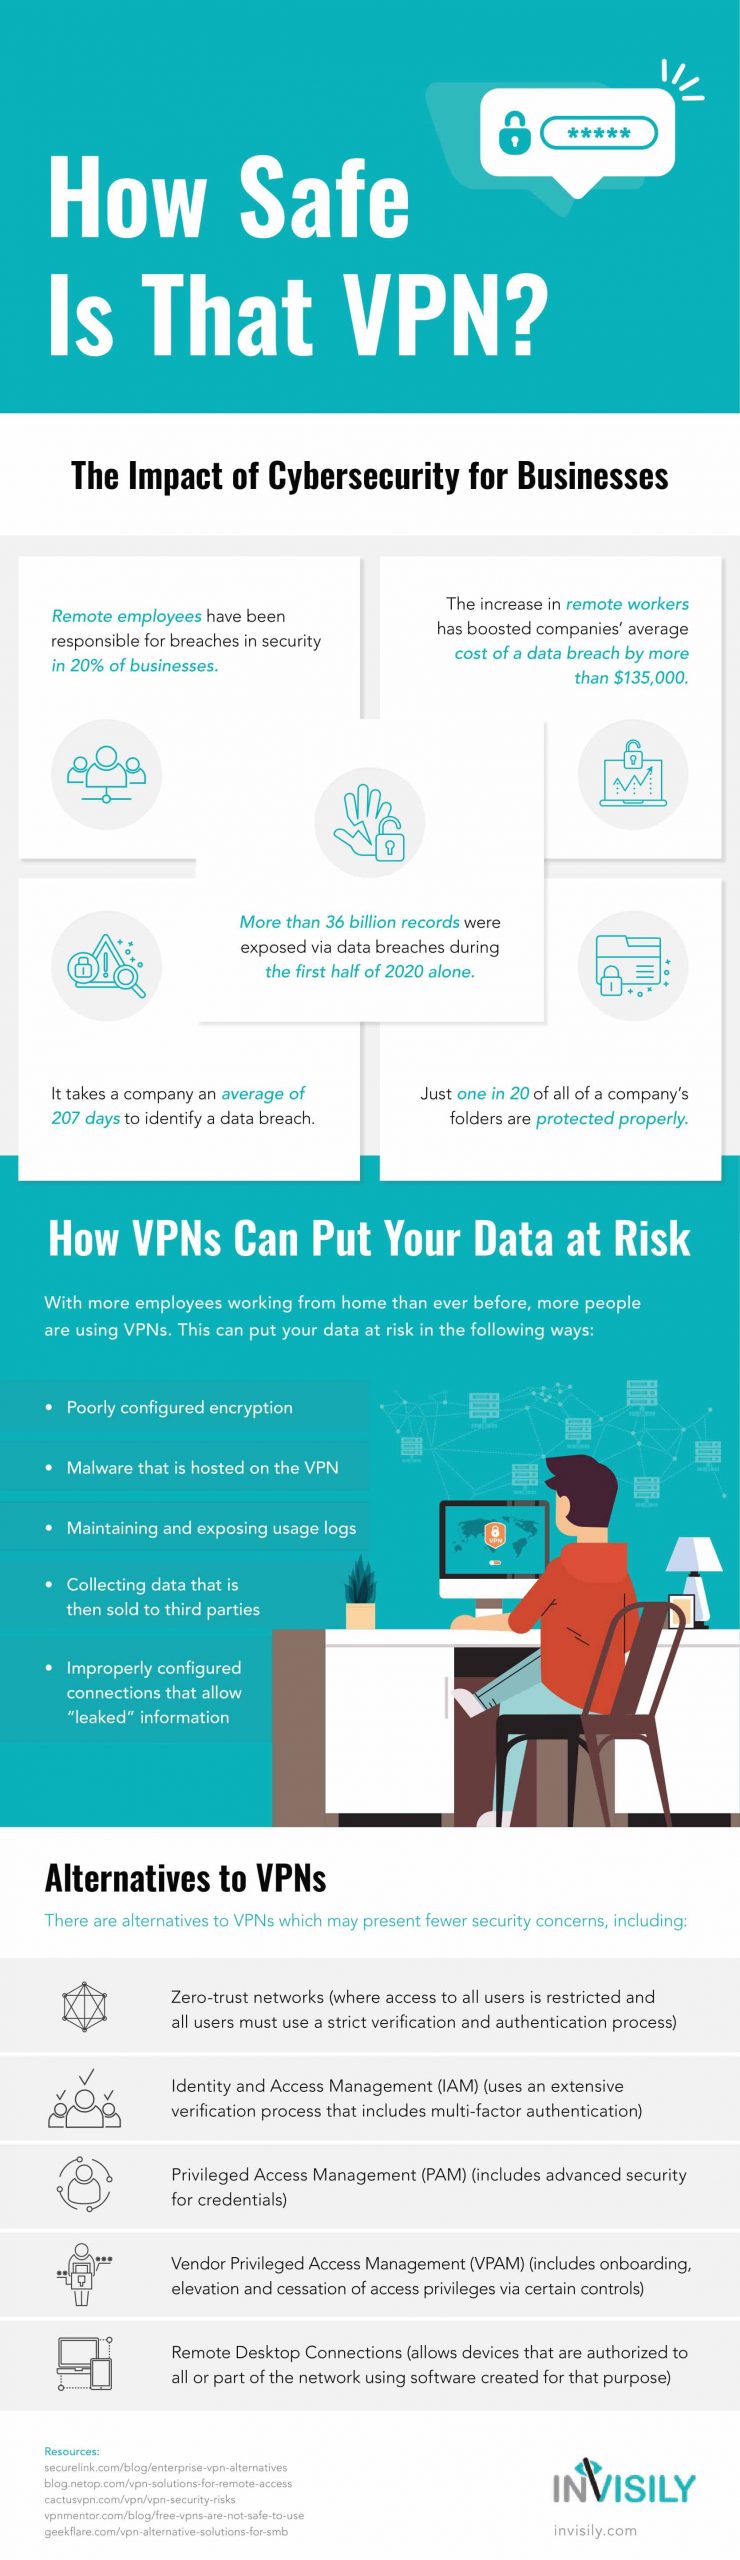 how safe is that vpn infographic